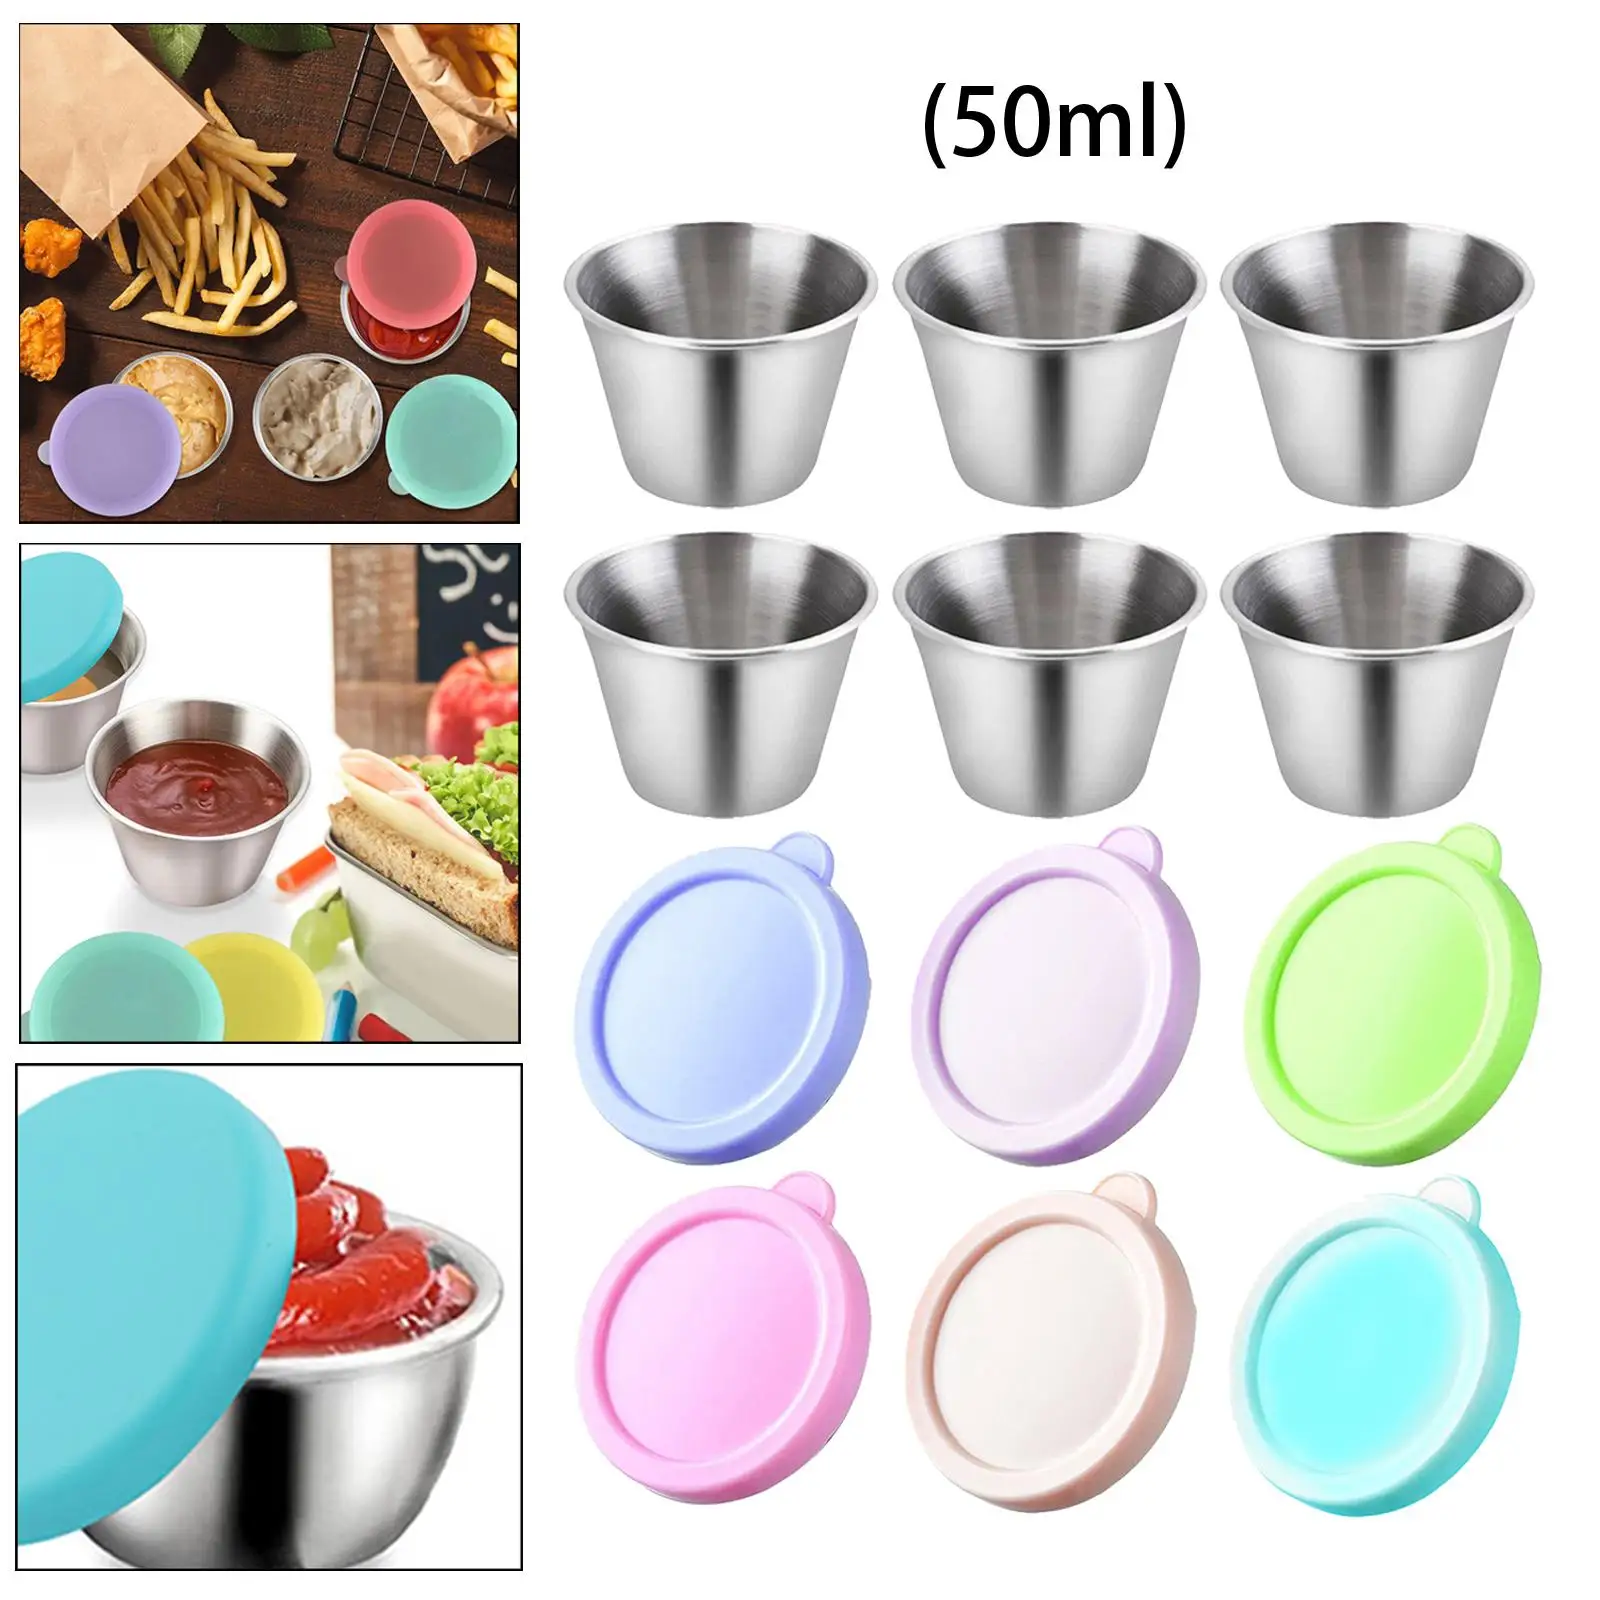 Multifunctional Sauce Cups Stainless Steel Sauce Pan Condiment Containers for Tea Sauces Butter Fries Dipping Sauce Dish Coffee